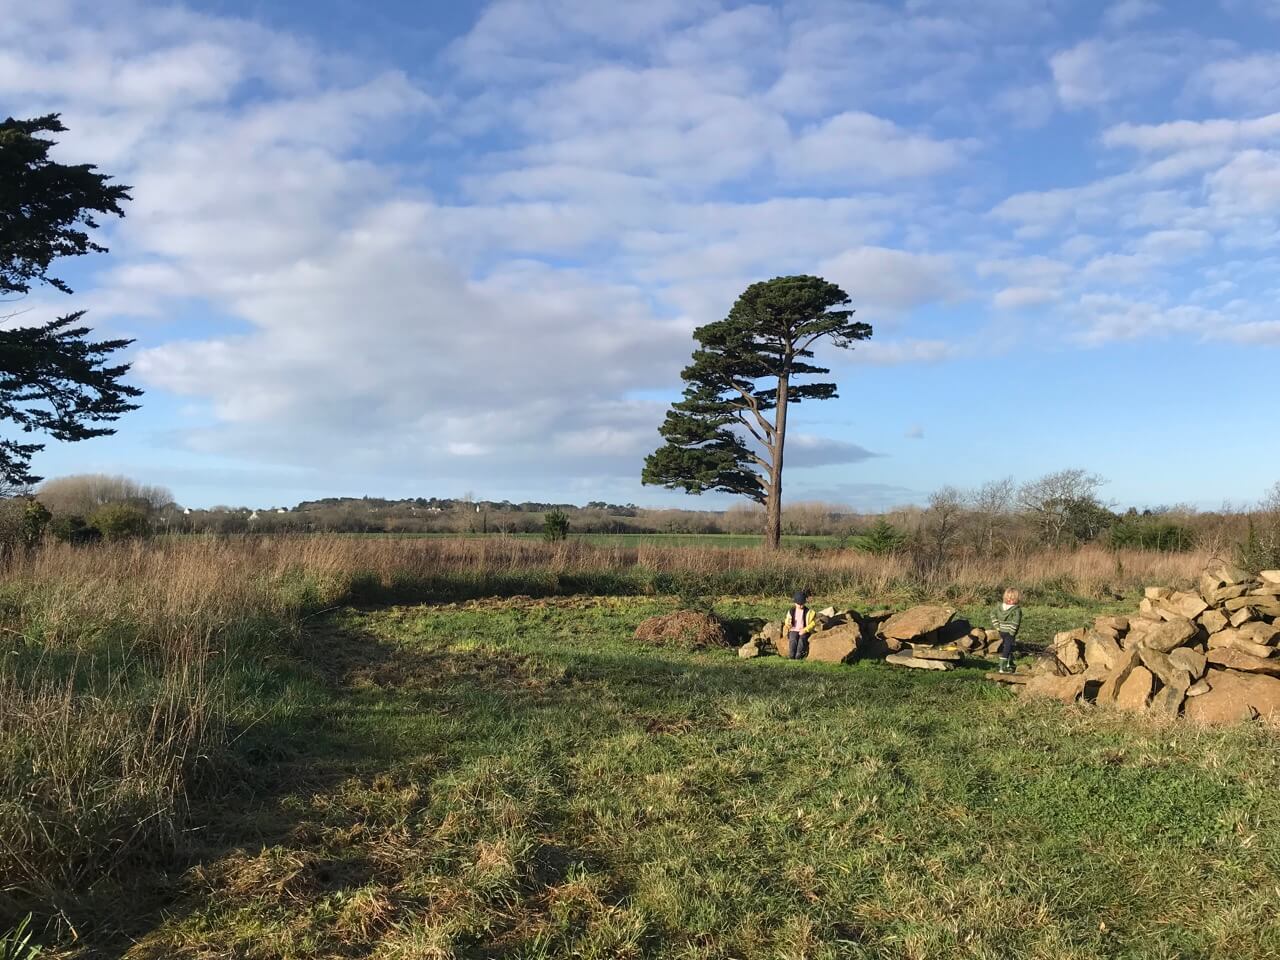 Tree planting project - Reforestation in Bretagne, France, planting 300 trees